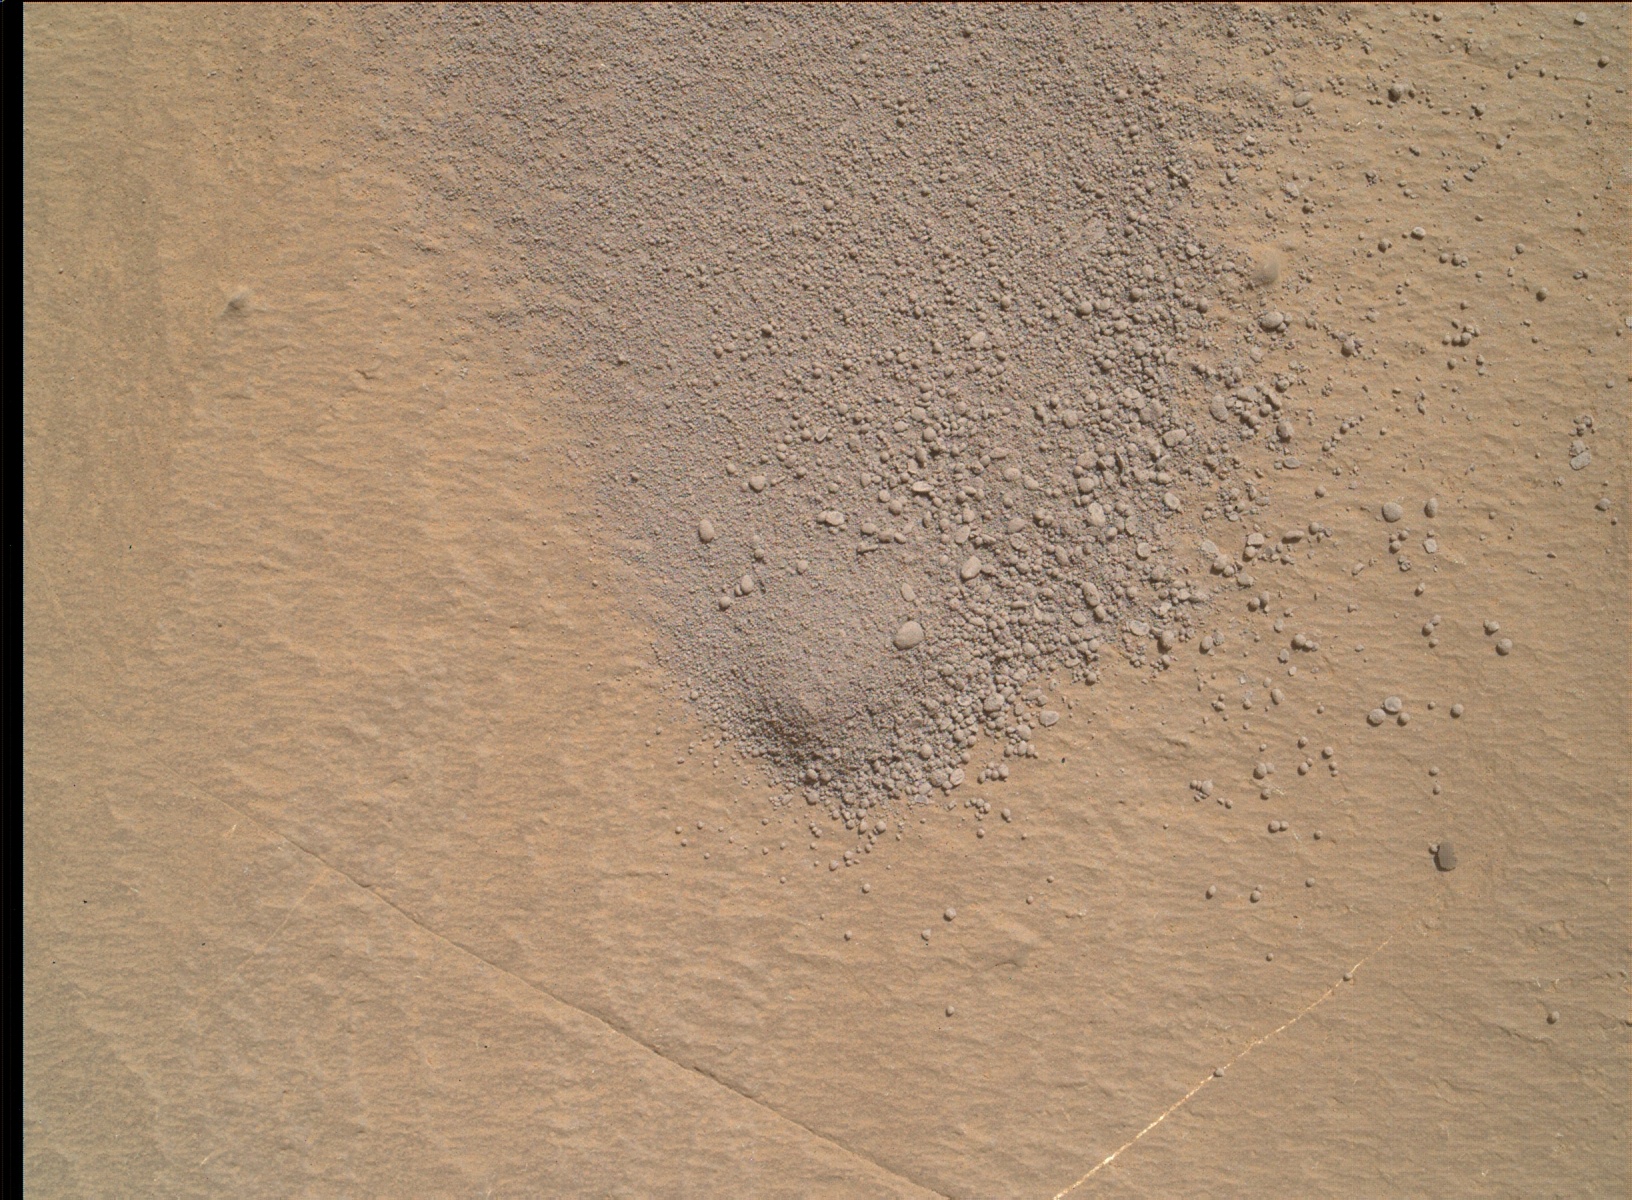 Nasa's Mars rover Curiosity acquired this image using its Mars Hand Lens Imager (MAHLI) on Sol 1426